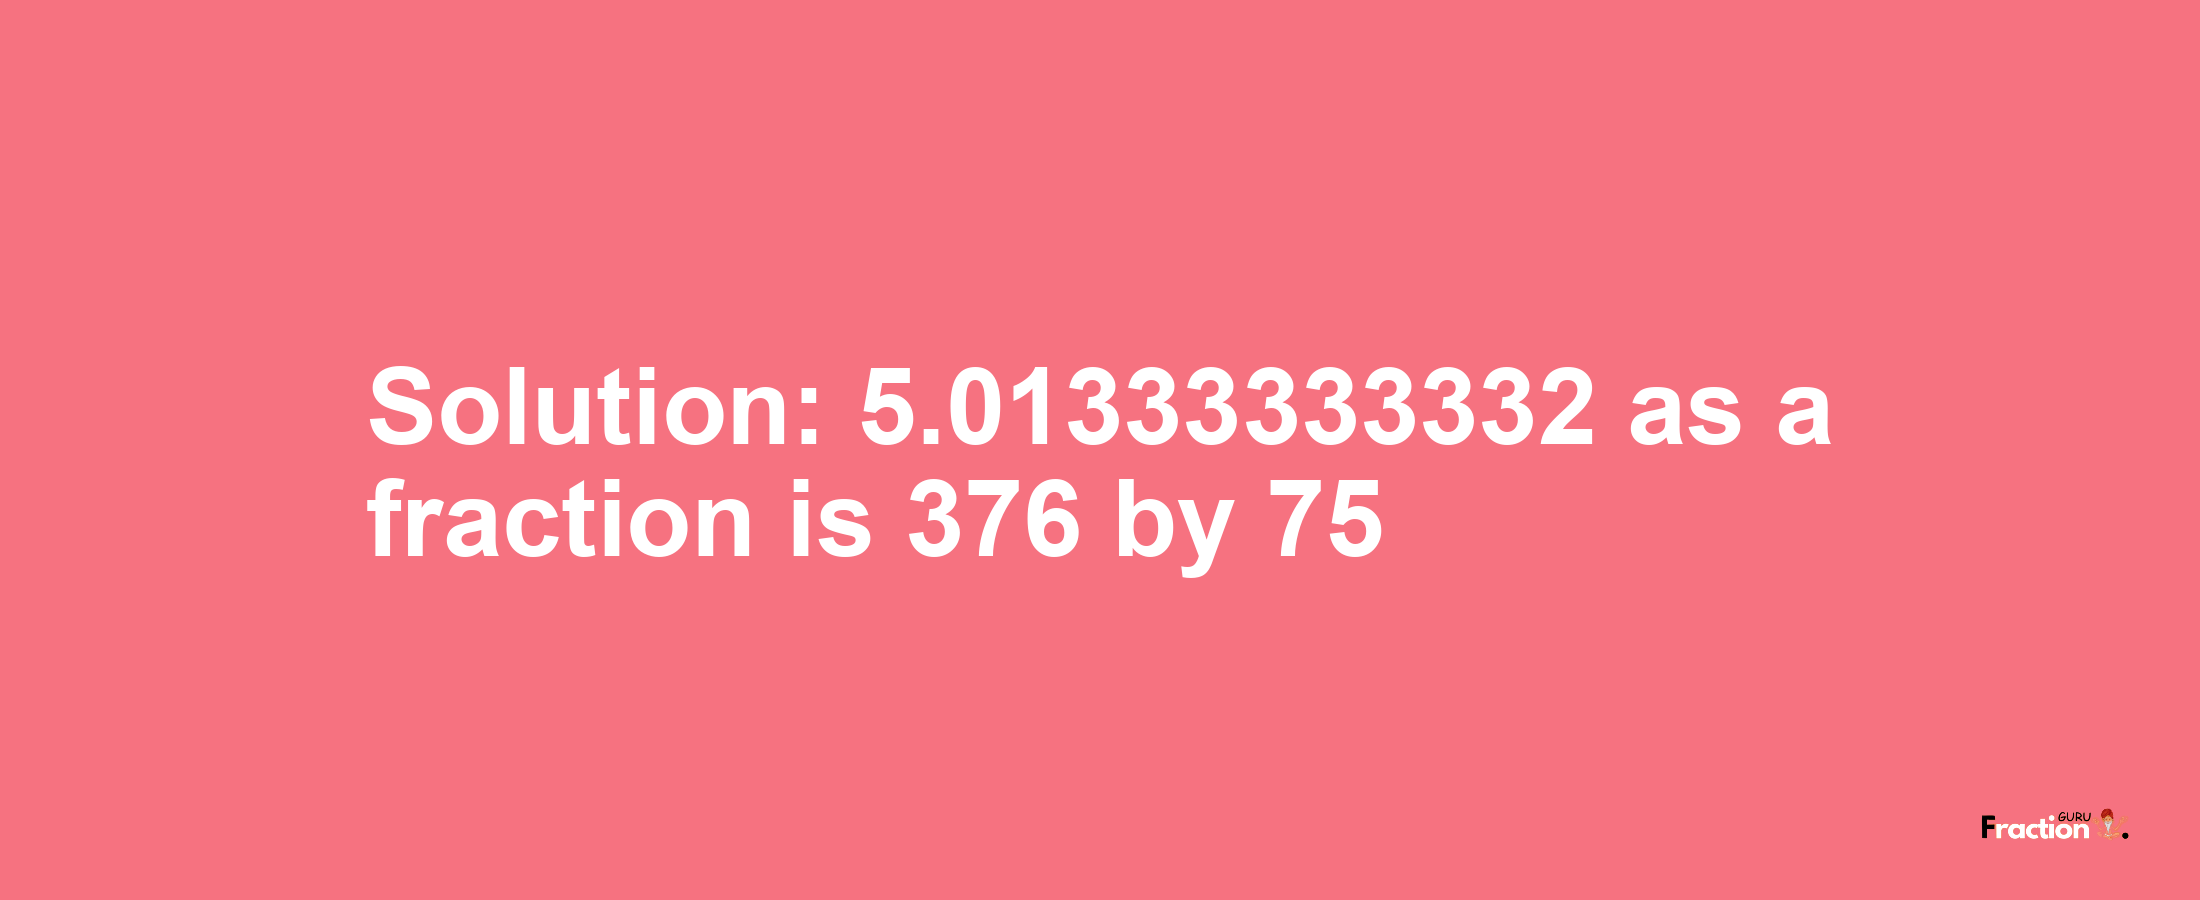 Solution:5.01333333332 as a fraction is 376/75